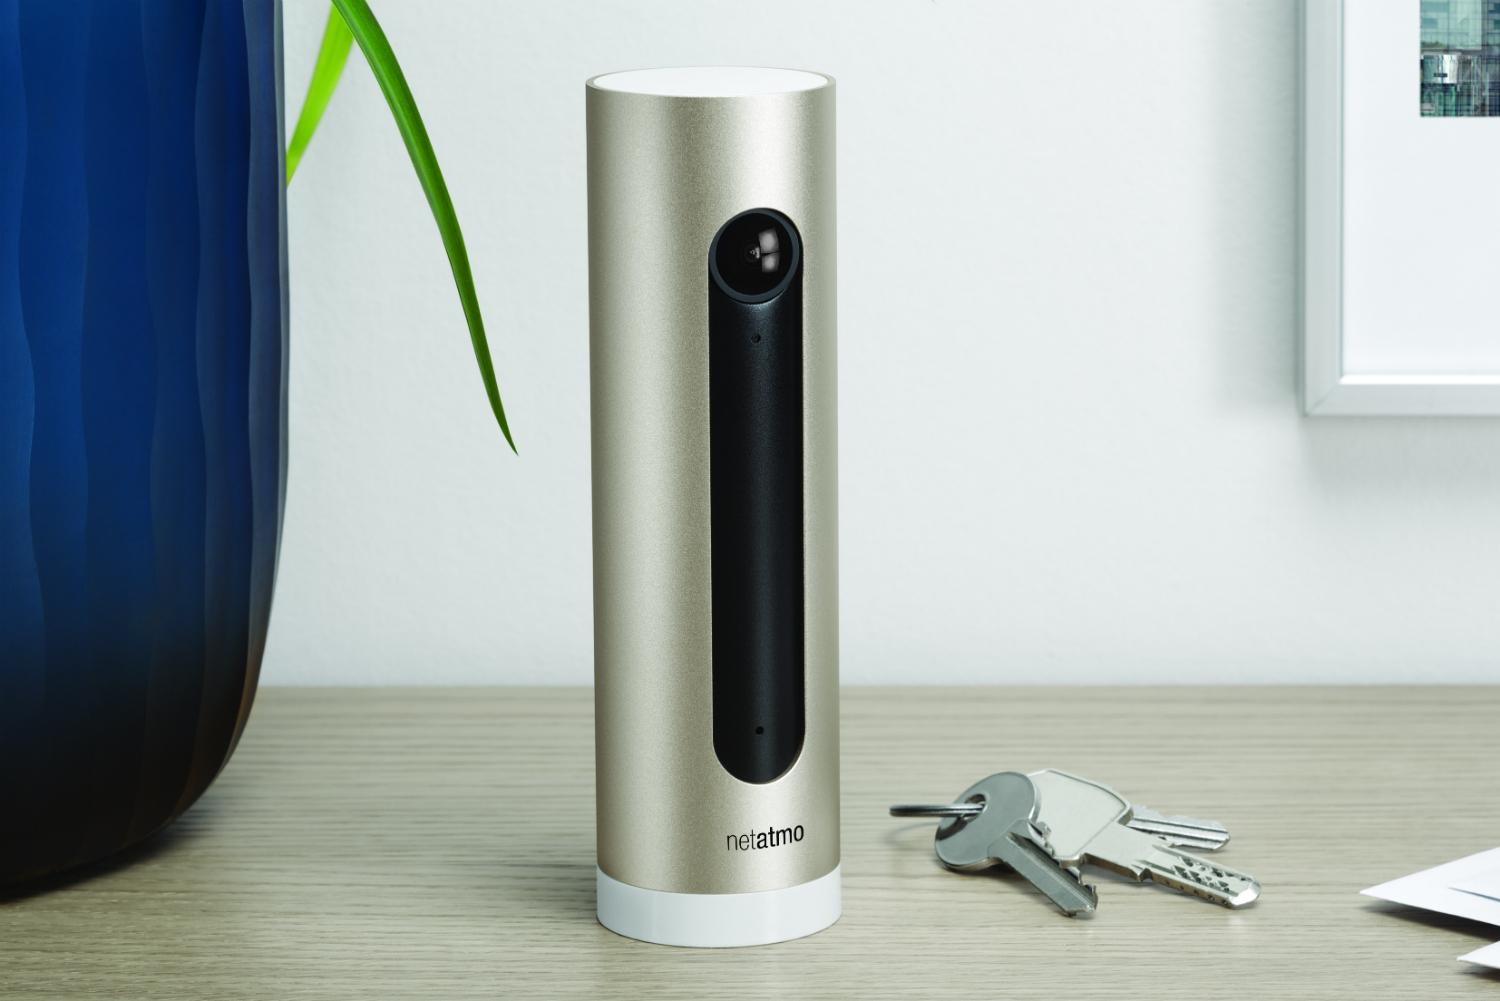 Netatmo's Welcome connected camera recognizes who's home